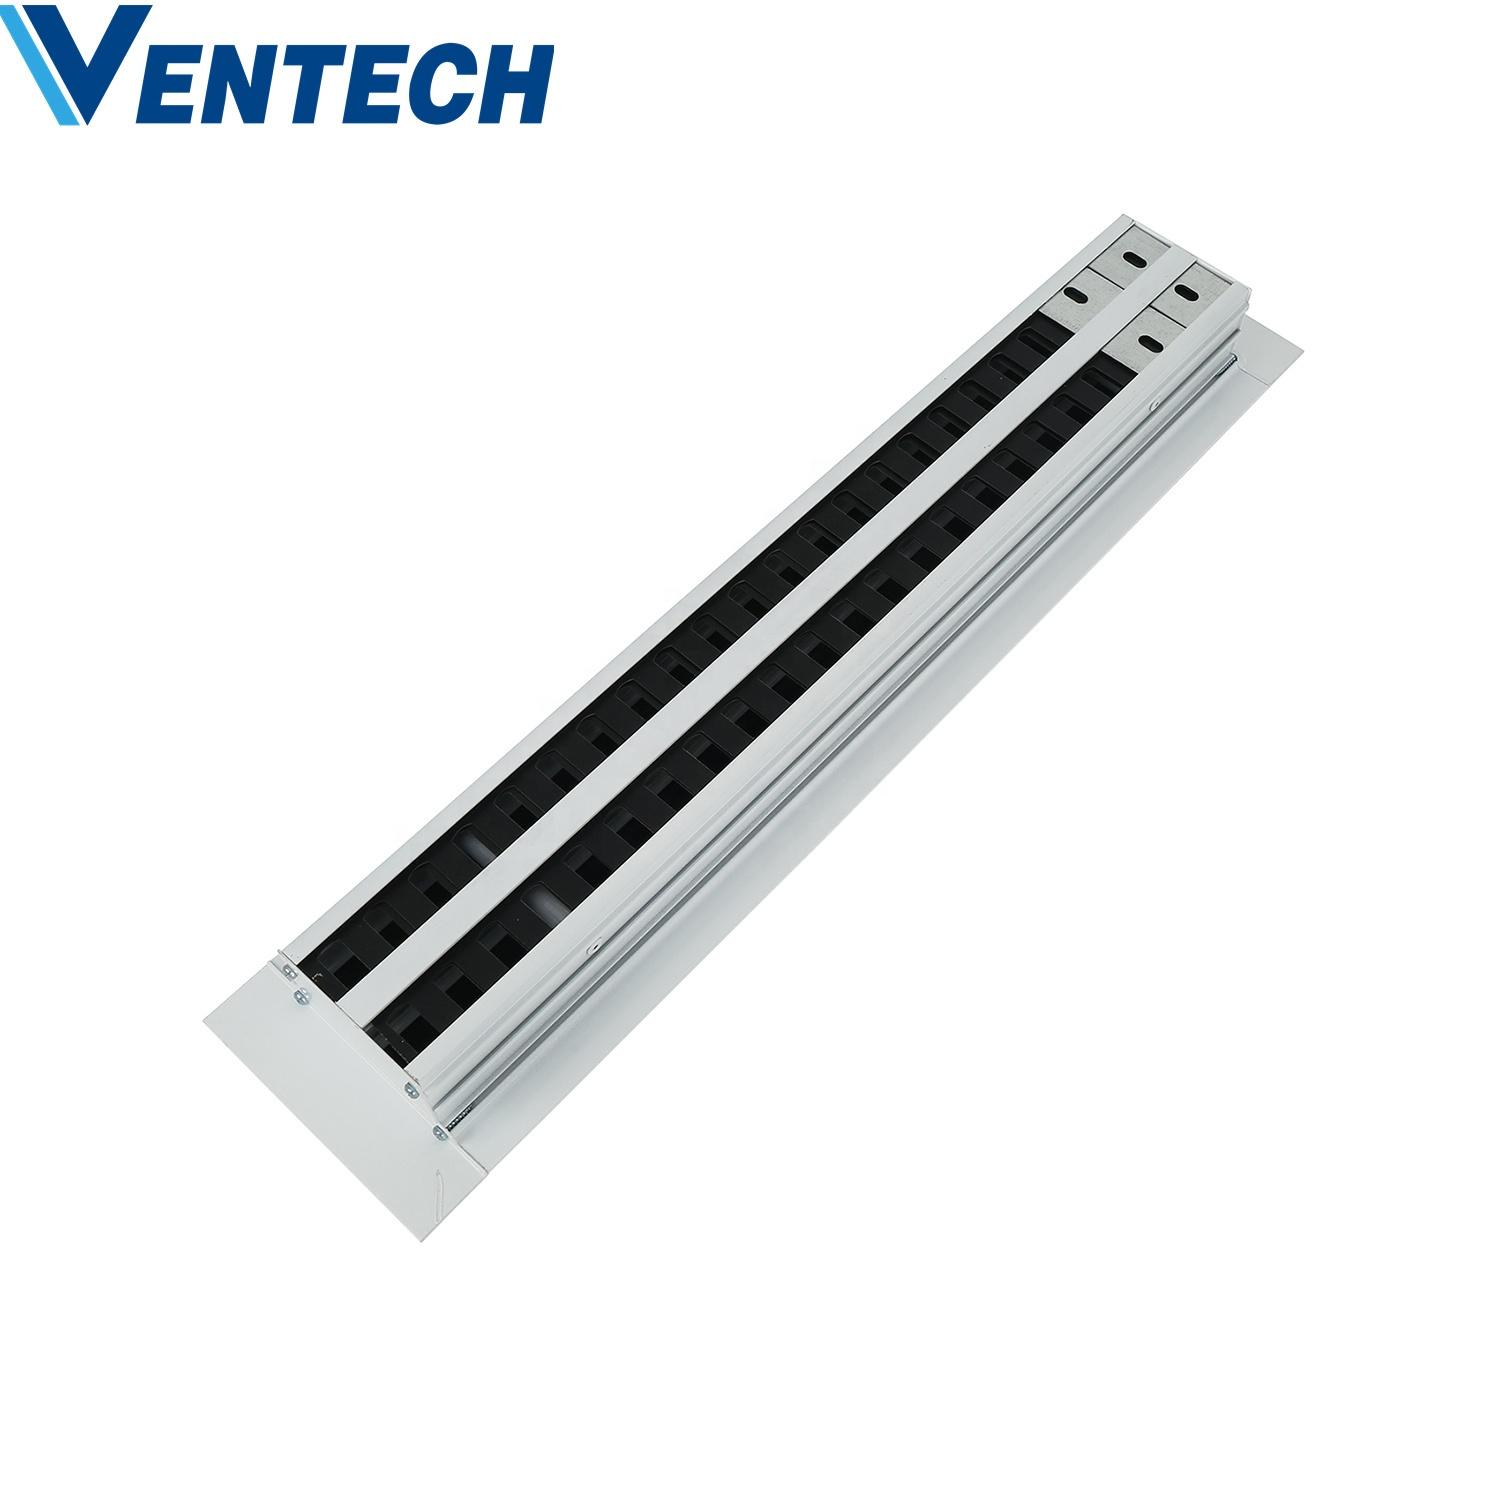 Hvac System Aluminum Exhaust Supply Air Ceiling Duct Diffuser Price Conditioning Ventilation Linear Slot VAV Diffusers